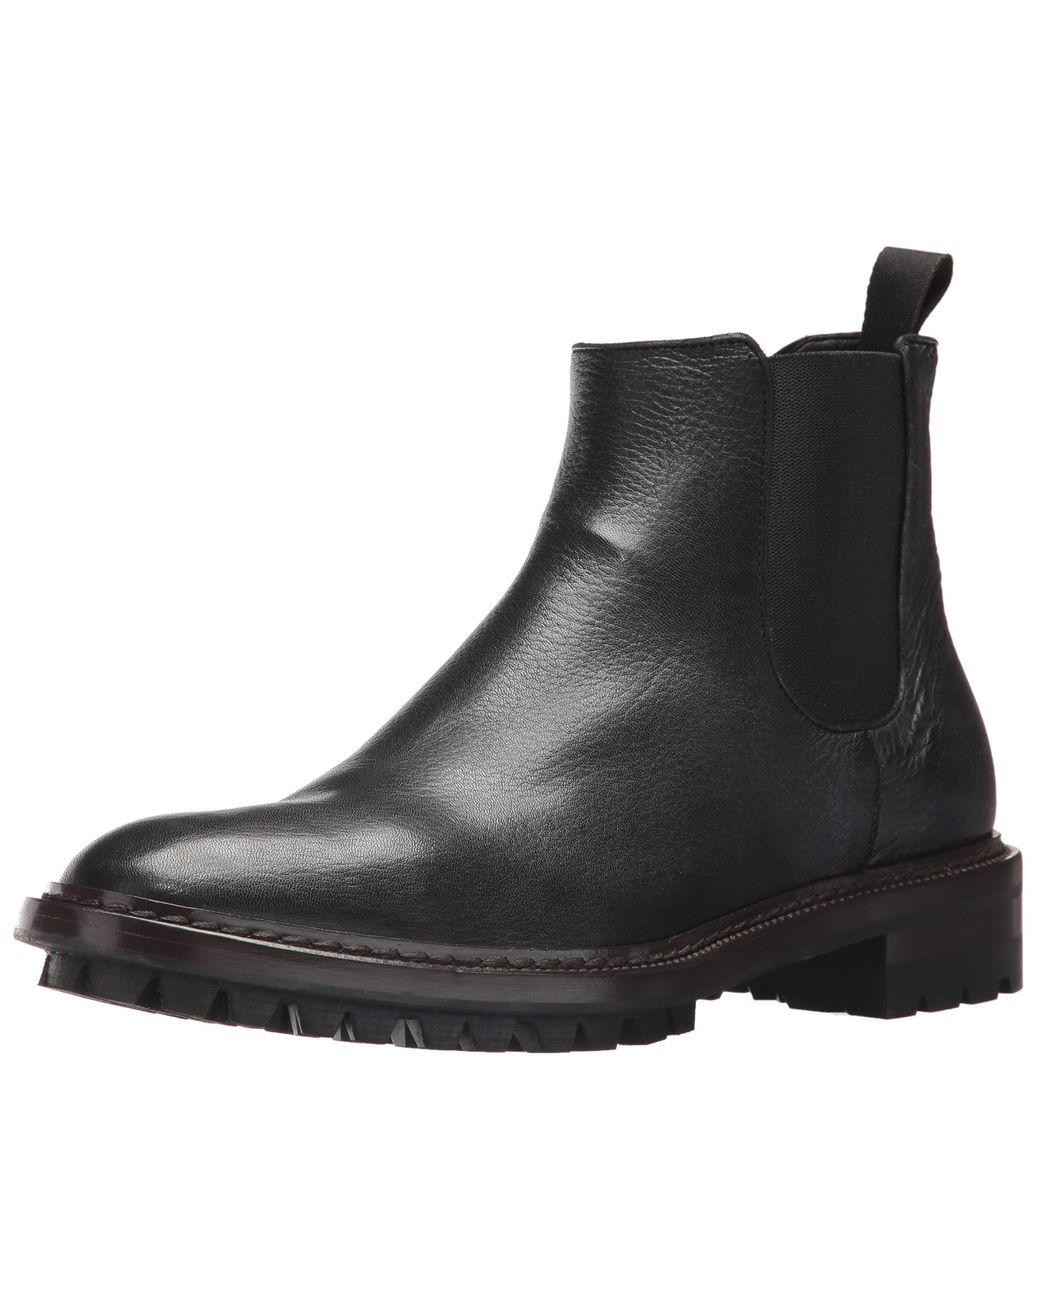 Frye Rubber Greyson Chelsea Boot, Black 11.5m M Us for Men - Save 50% - Lyst